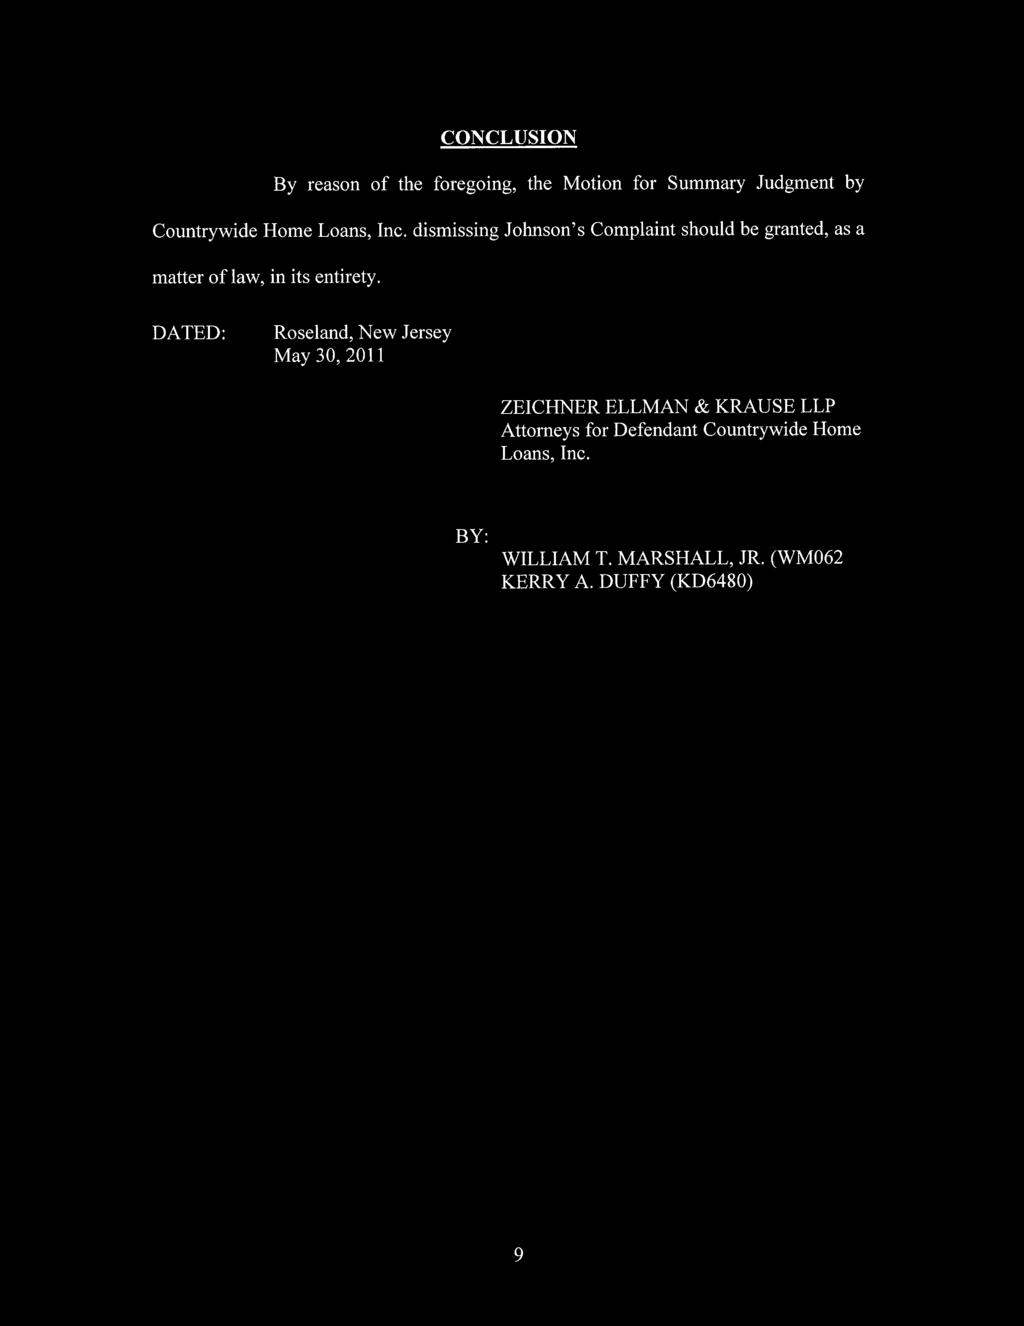 Case 3:08-cv-05134-AET -DEA Document 98 Filed 05/30/11 Page 12 of 12 PageID: 1113 CONCLUSION By reason of the foregoing, the Motion for Summary Judgment by Countrywide Home Loans, Inc.